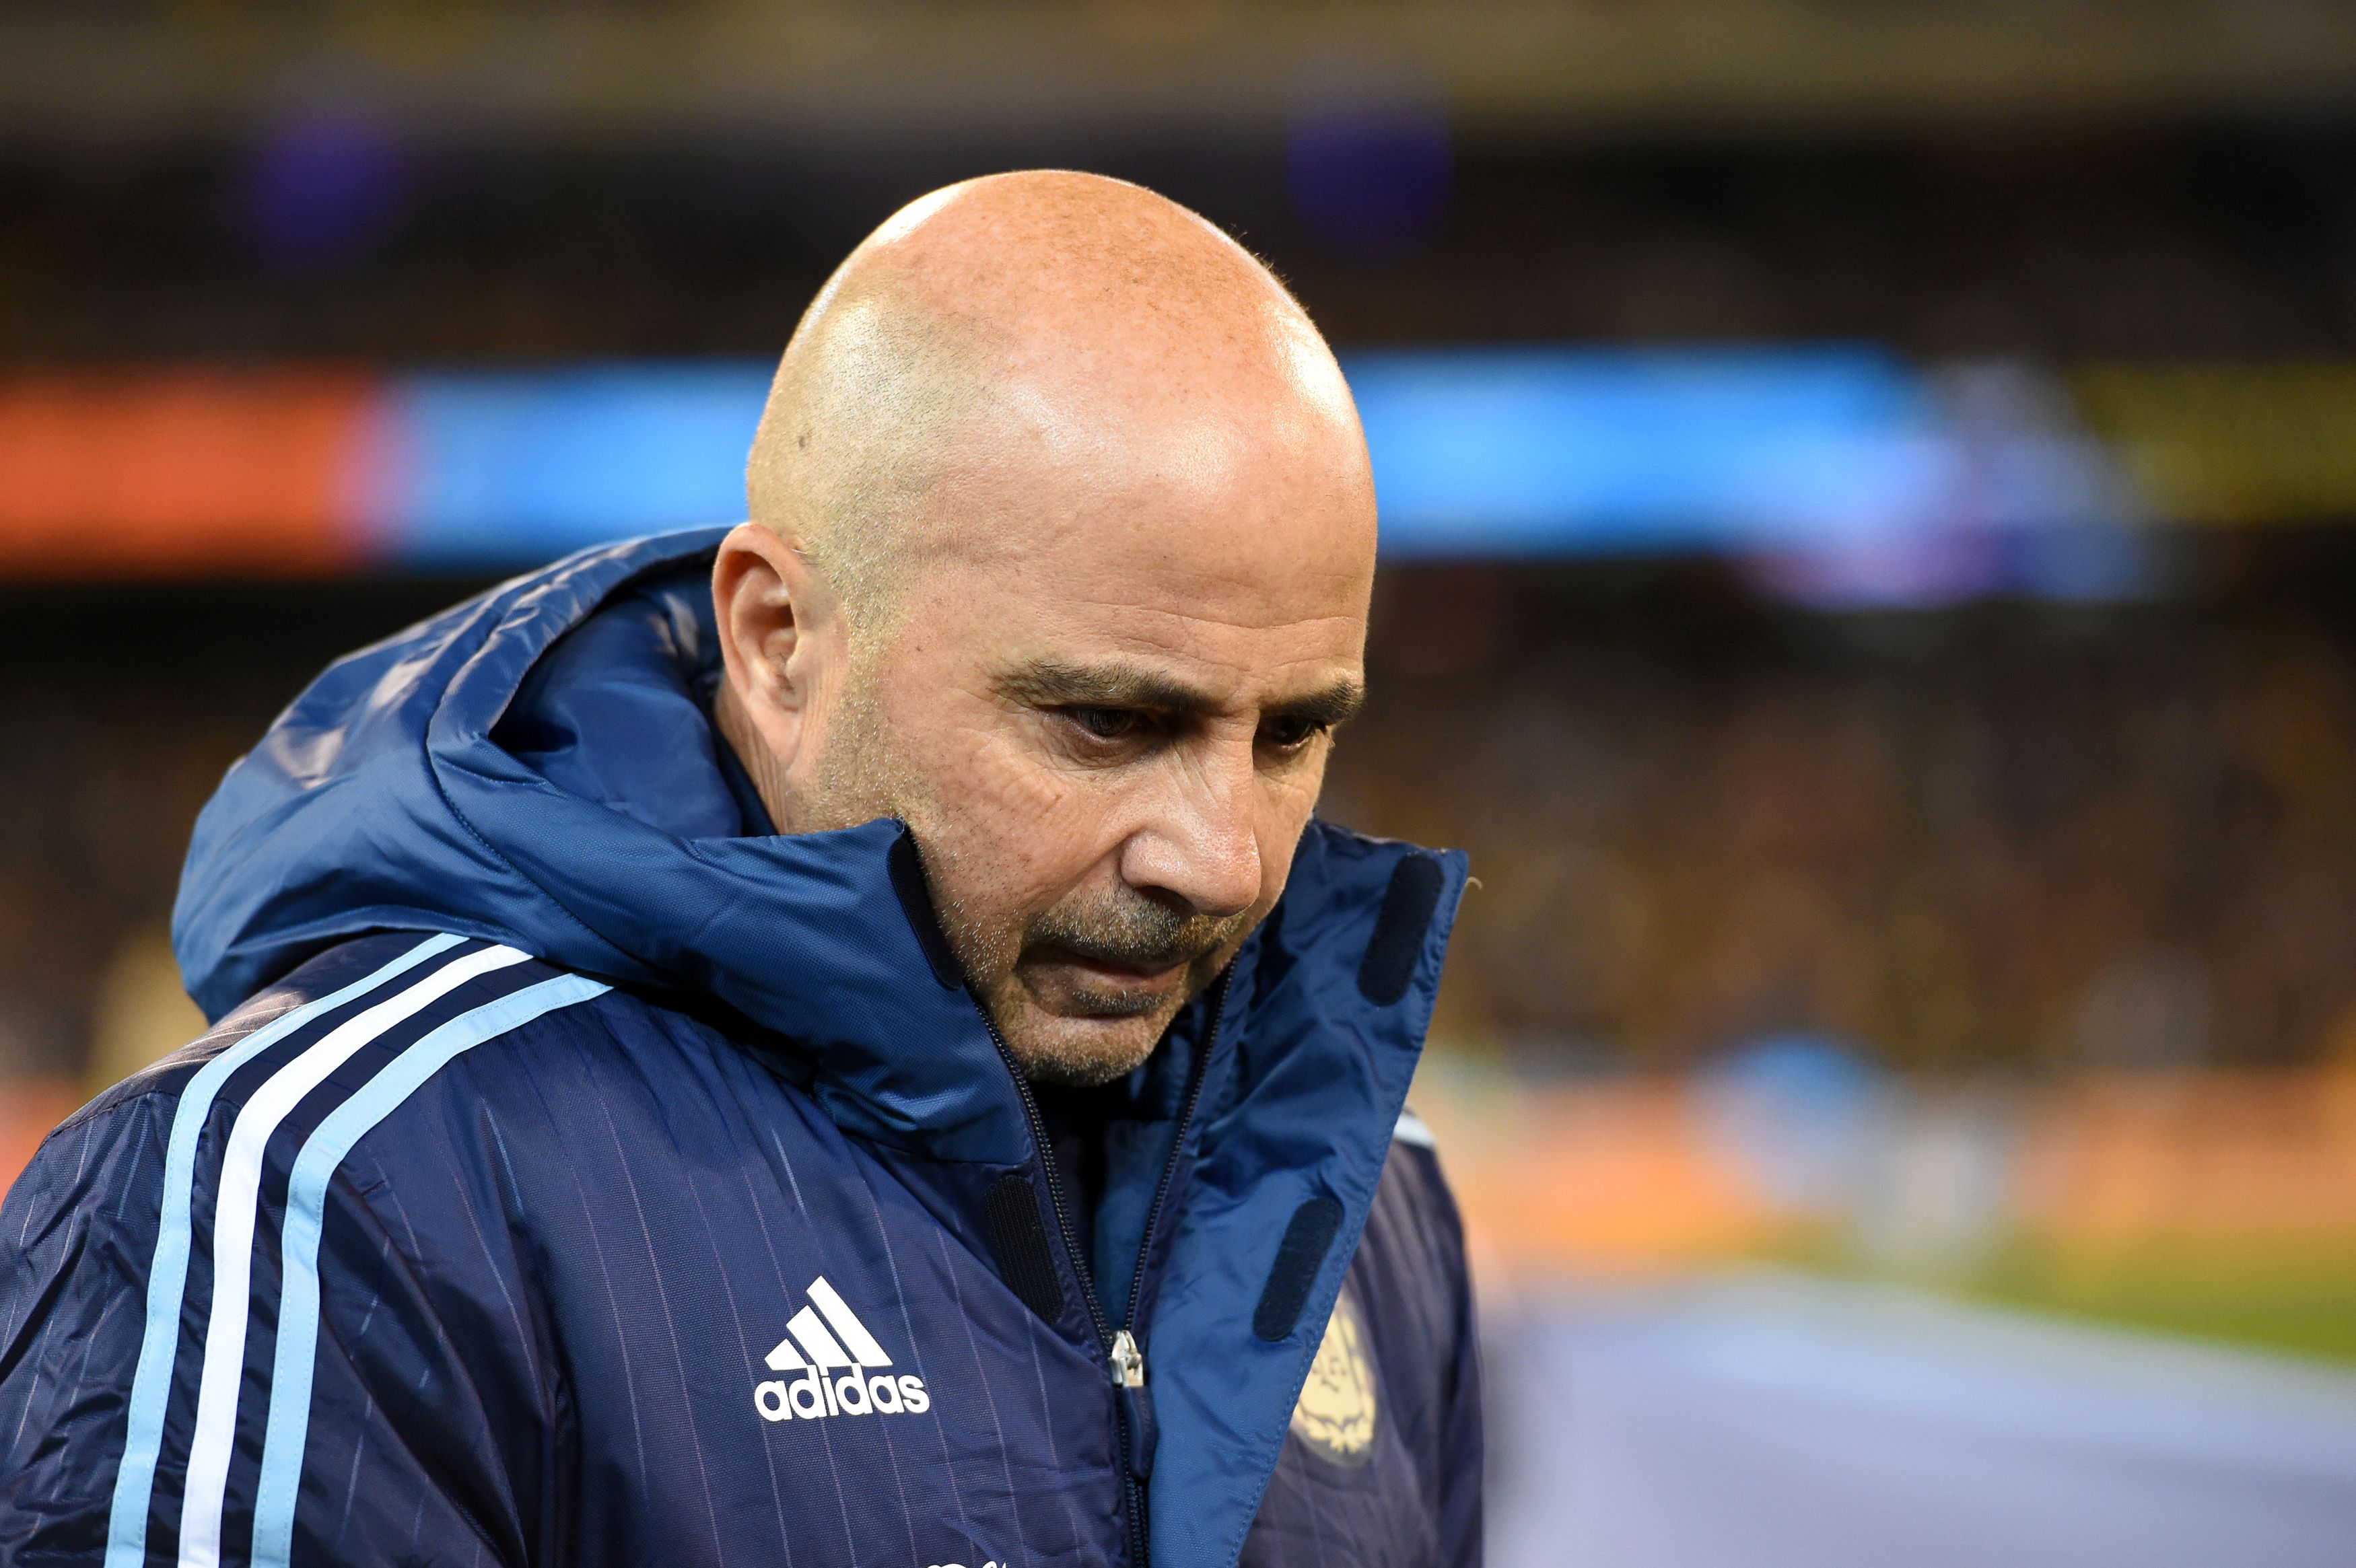 Argentina's football manager Jorge Sampaoli walks off the field before the friendly international football match between Brazil and Argentina at the MCG in Melbourne on June 9, 2017. / AFP PHOTO / SAEED KHAN / IMAGE RESTRICTED TO EDITORIAL USE - STRICTLY NO COMMERCIAL USE        (Photo credit should read SAEED KHAN/AFP/Getty Images)